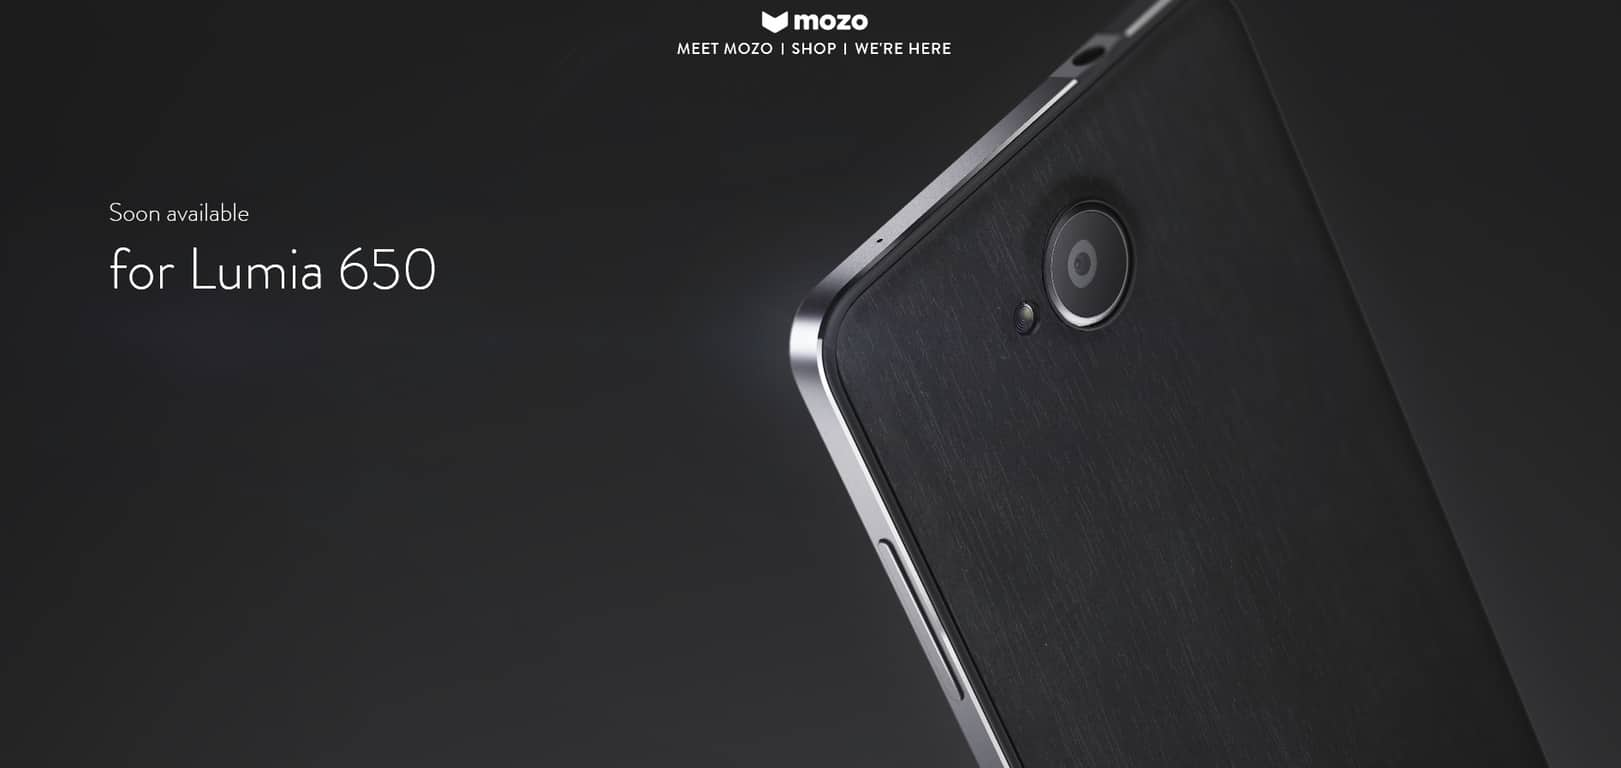 Microsoft Lumia accessories partner Mozo teases new replaceable backs for Lumia 650 - OnMSFT.com - February 15, 2016